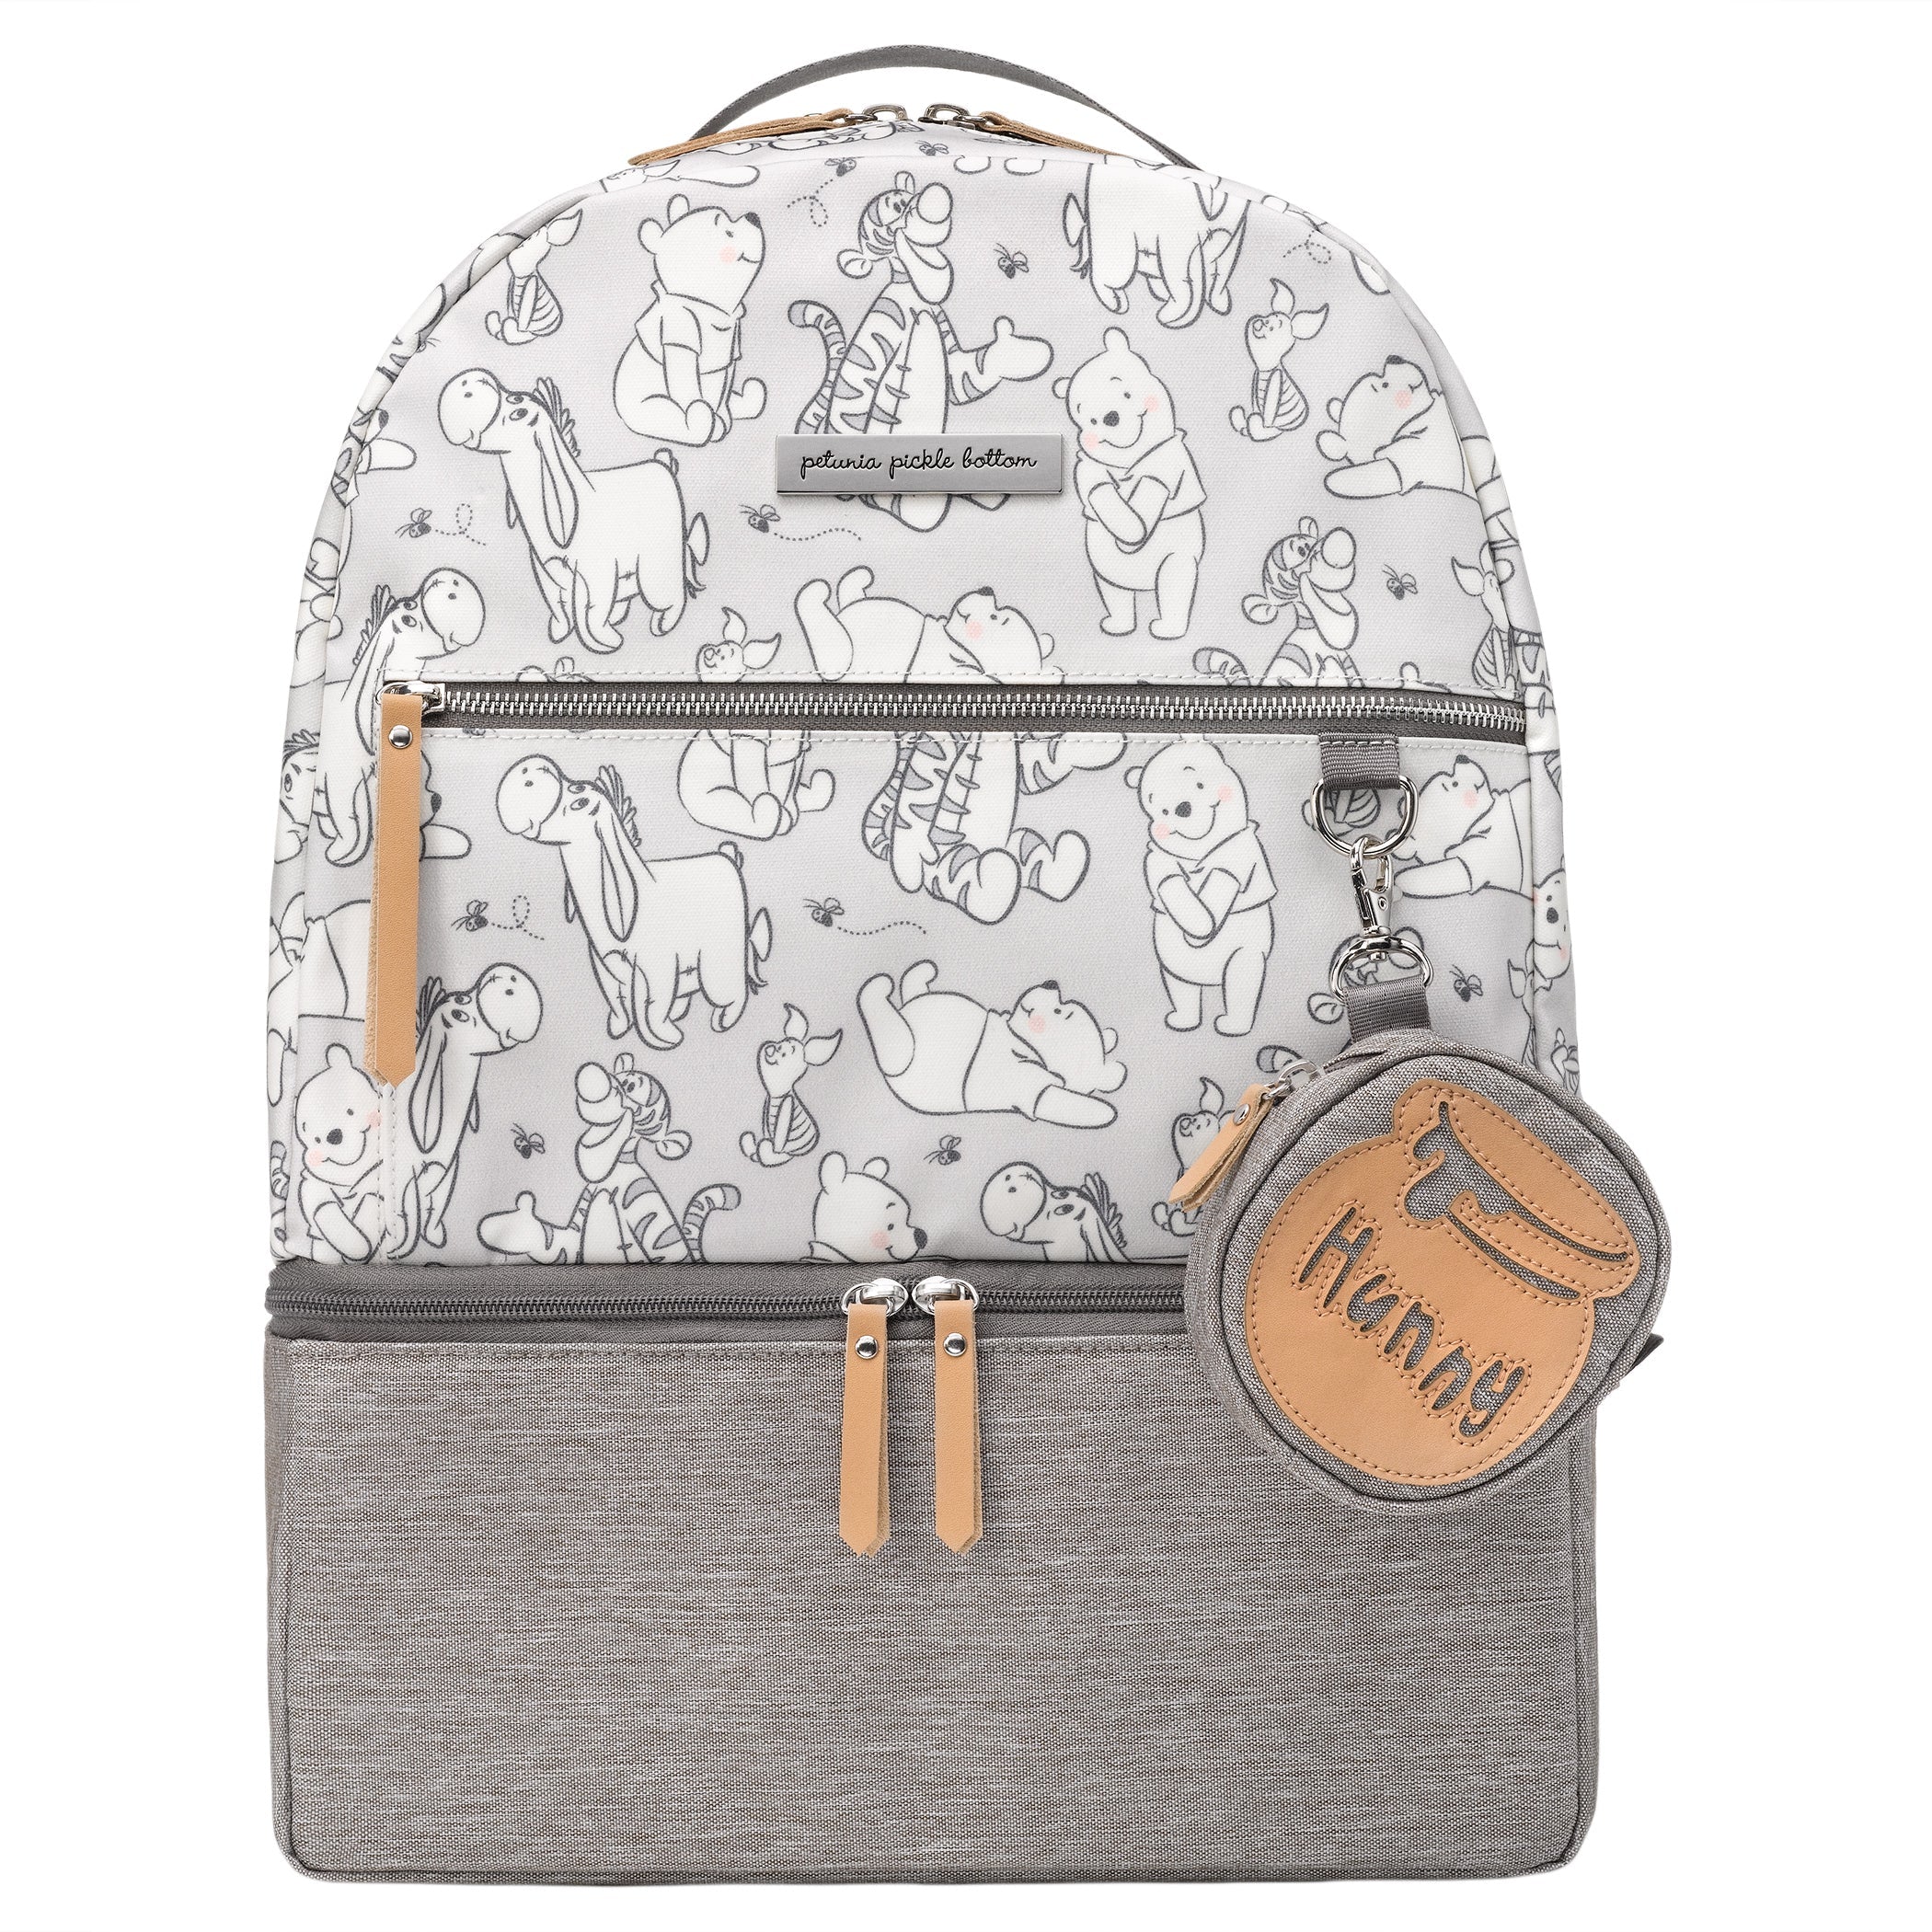 Petunia Pickle Bottom Axis Backpack in Disney's Playful Pooh